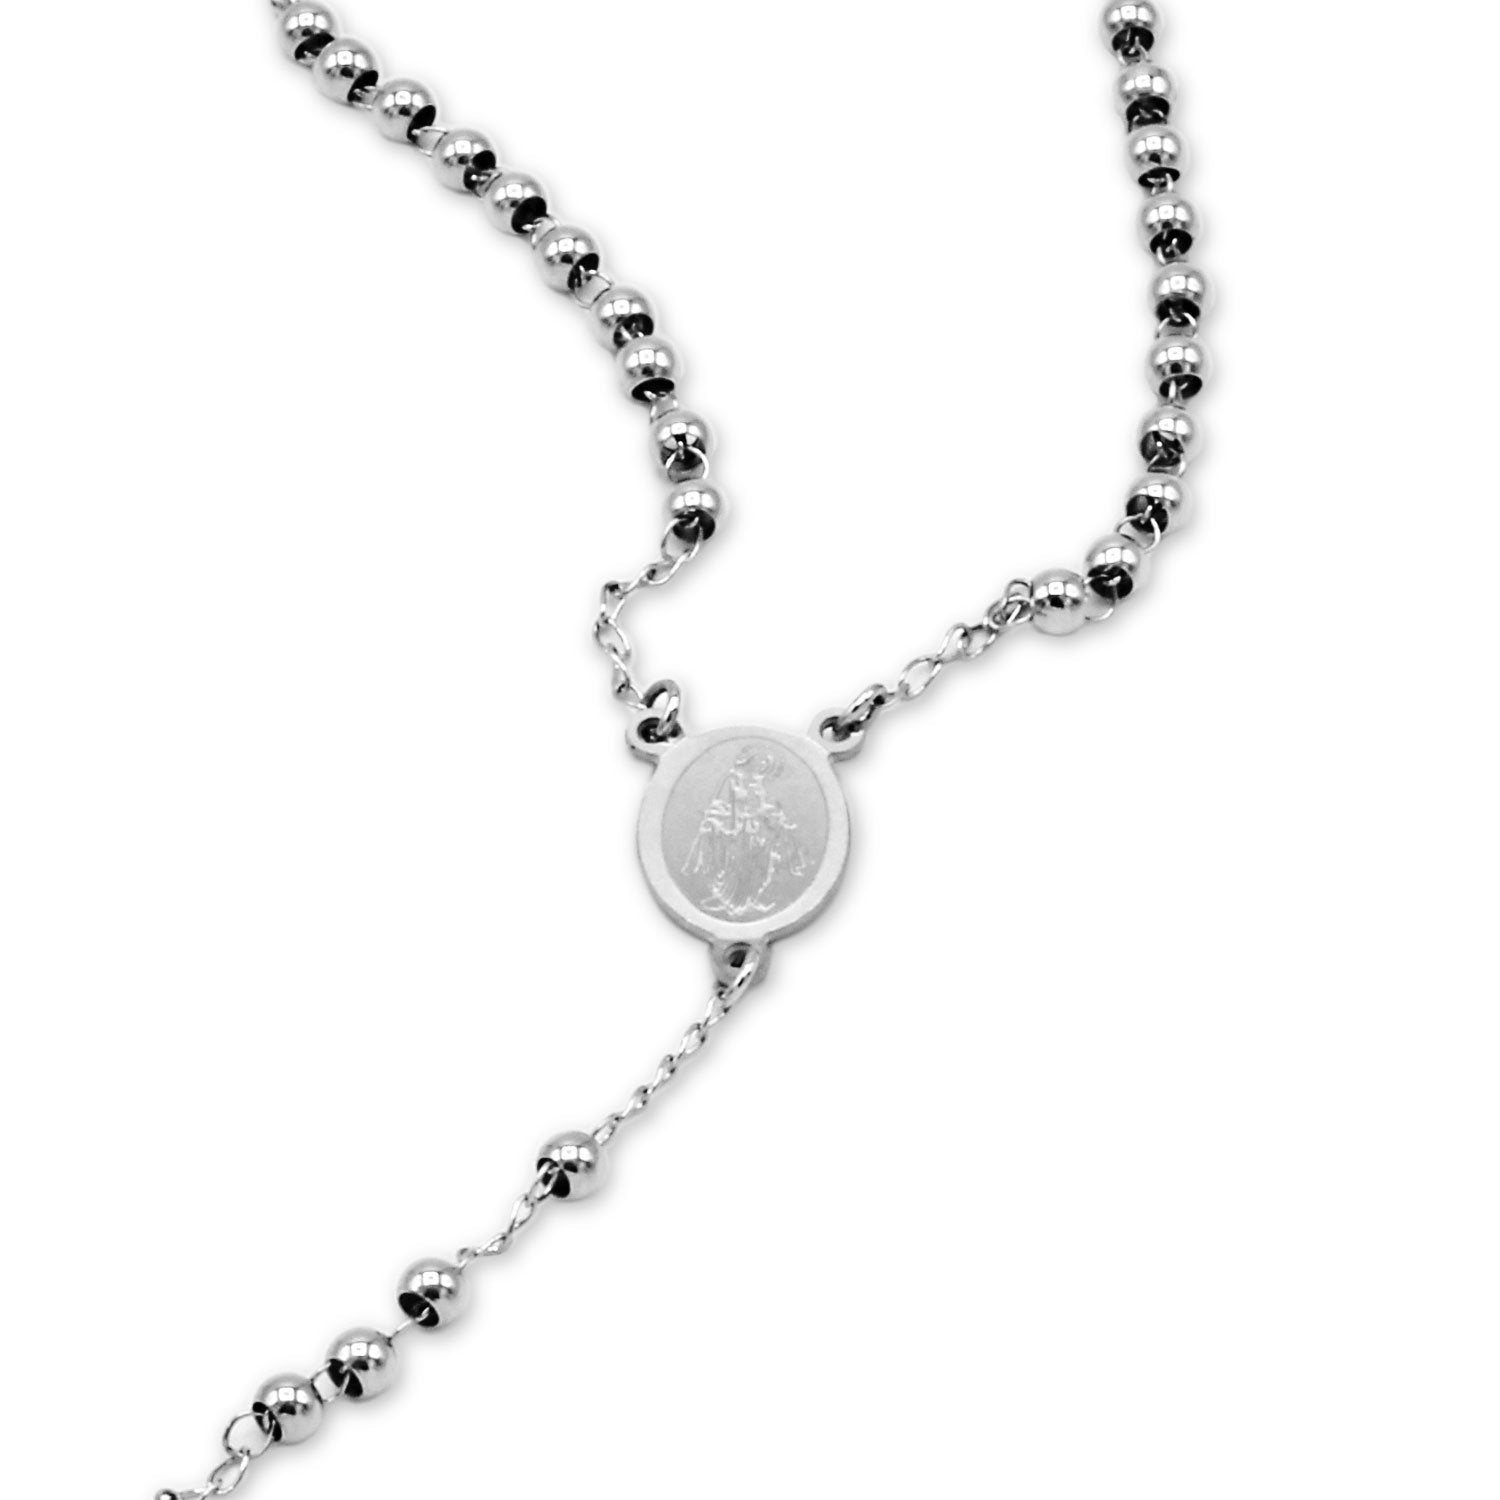 Traditional Silver Rosary Necklace Five Decade Catholic Prayer Beads 3mm